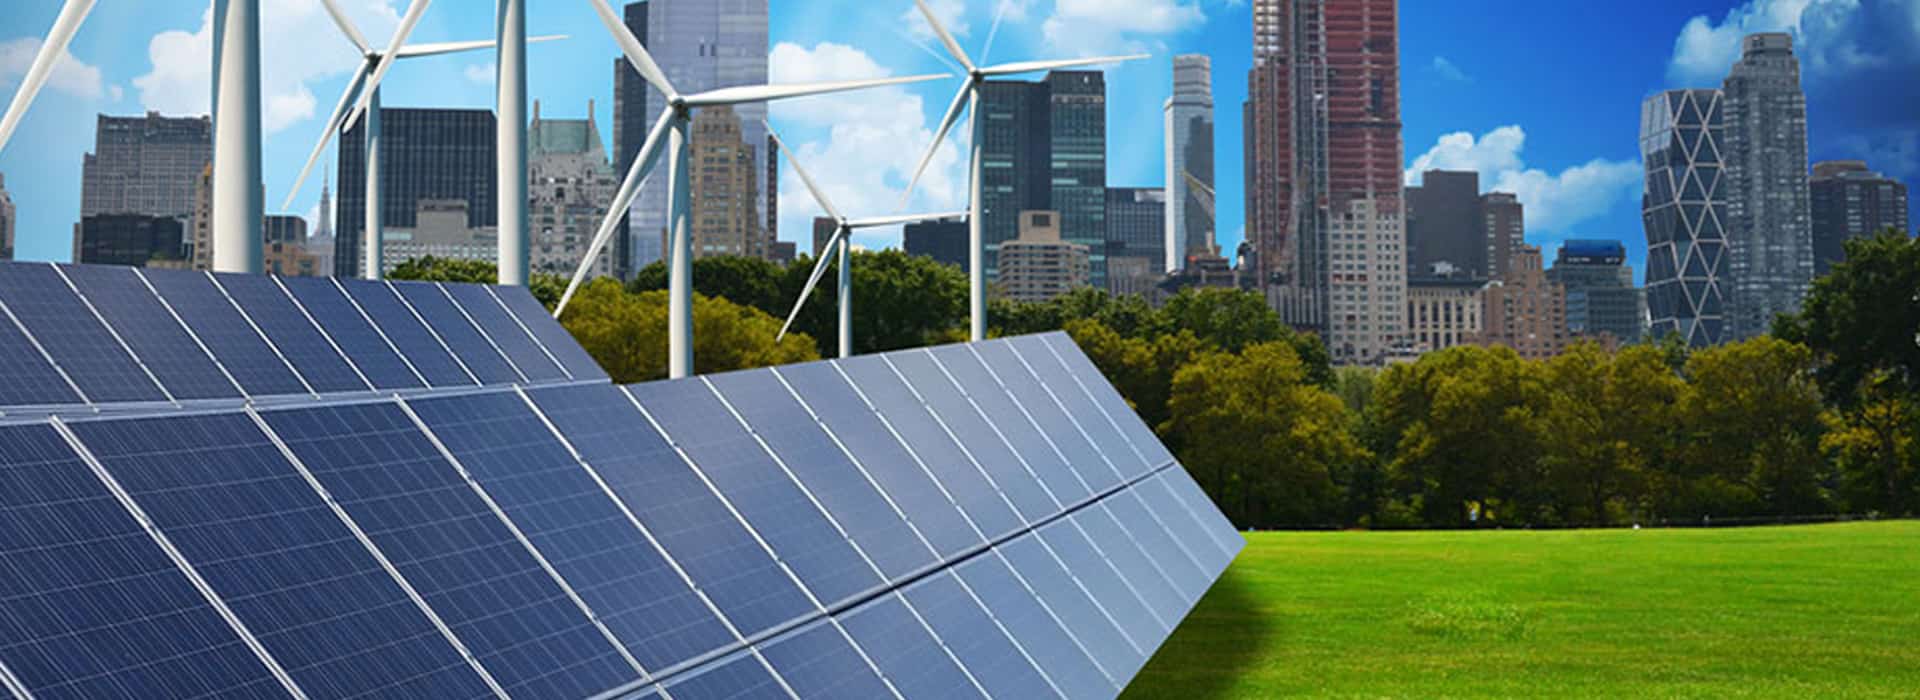 Sustainable energy banner image